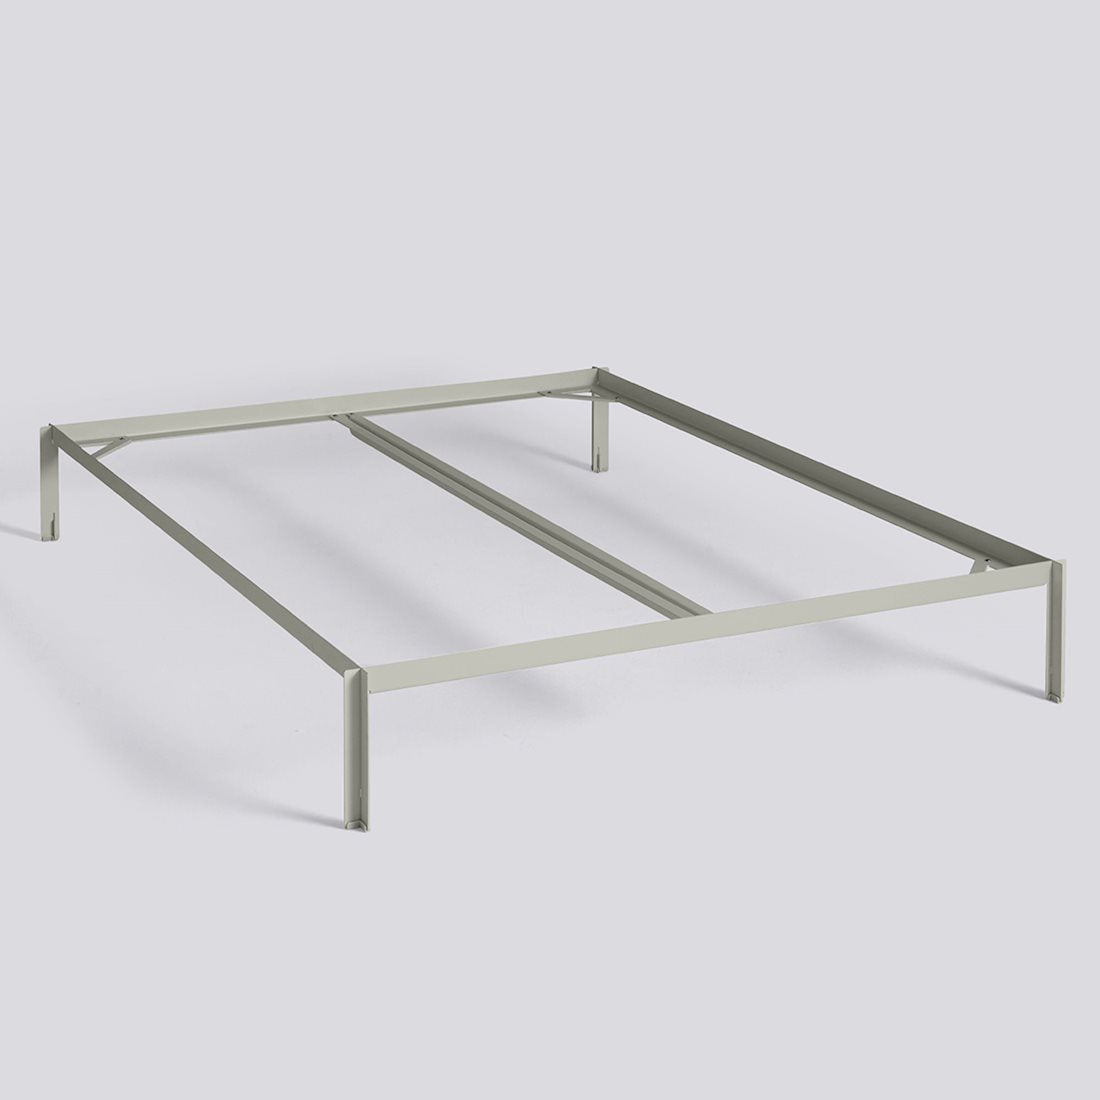 CONNECT BED / INCL. CROSSBAR FOR L200 X W160 MATTRESS